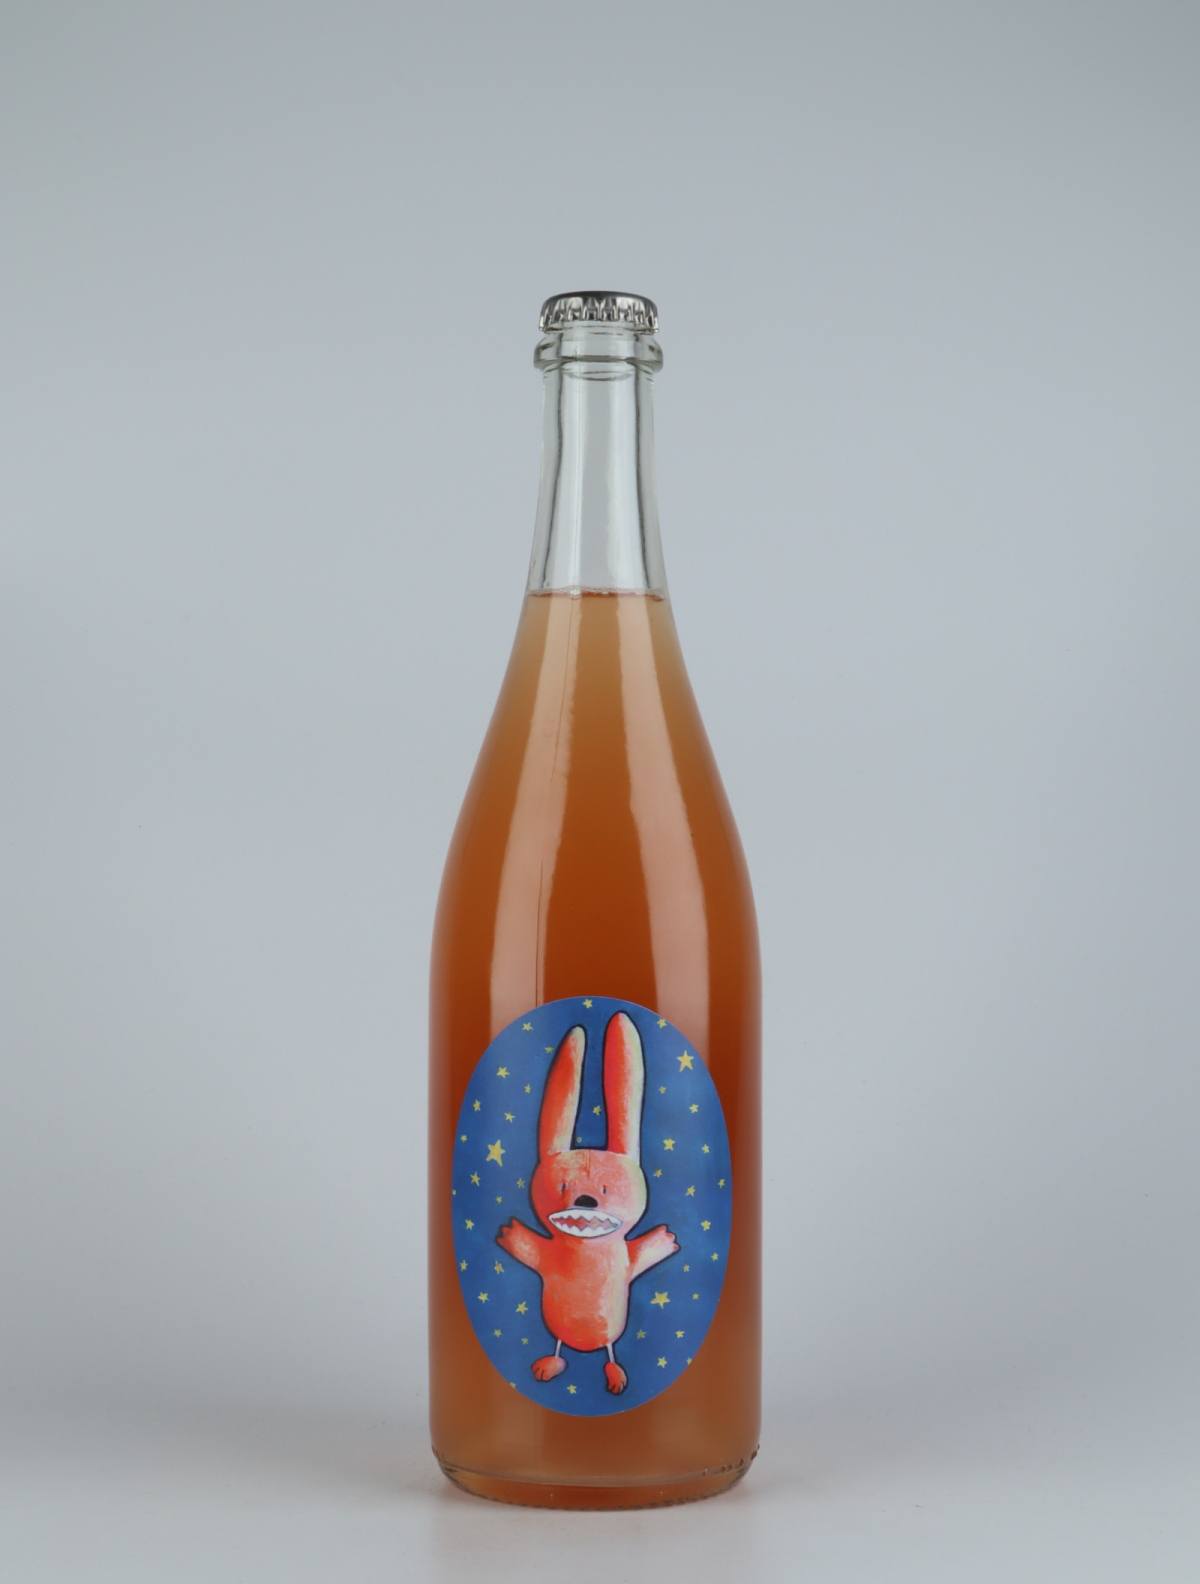 A bottle 2020 Astro Bunny Sparkling from Wildman, Adelaide Hills in Australia